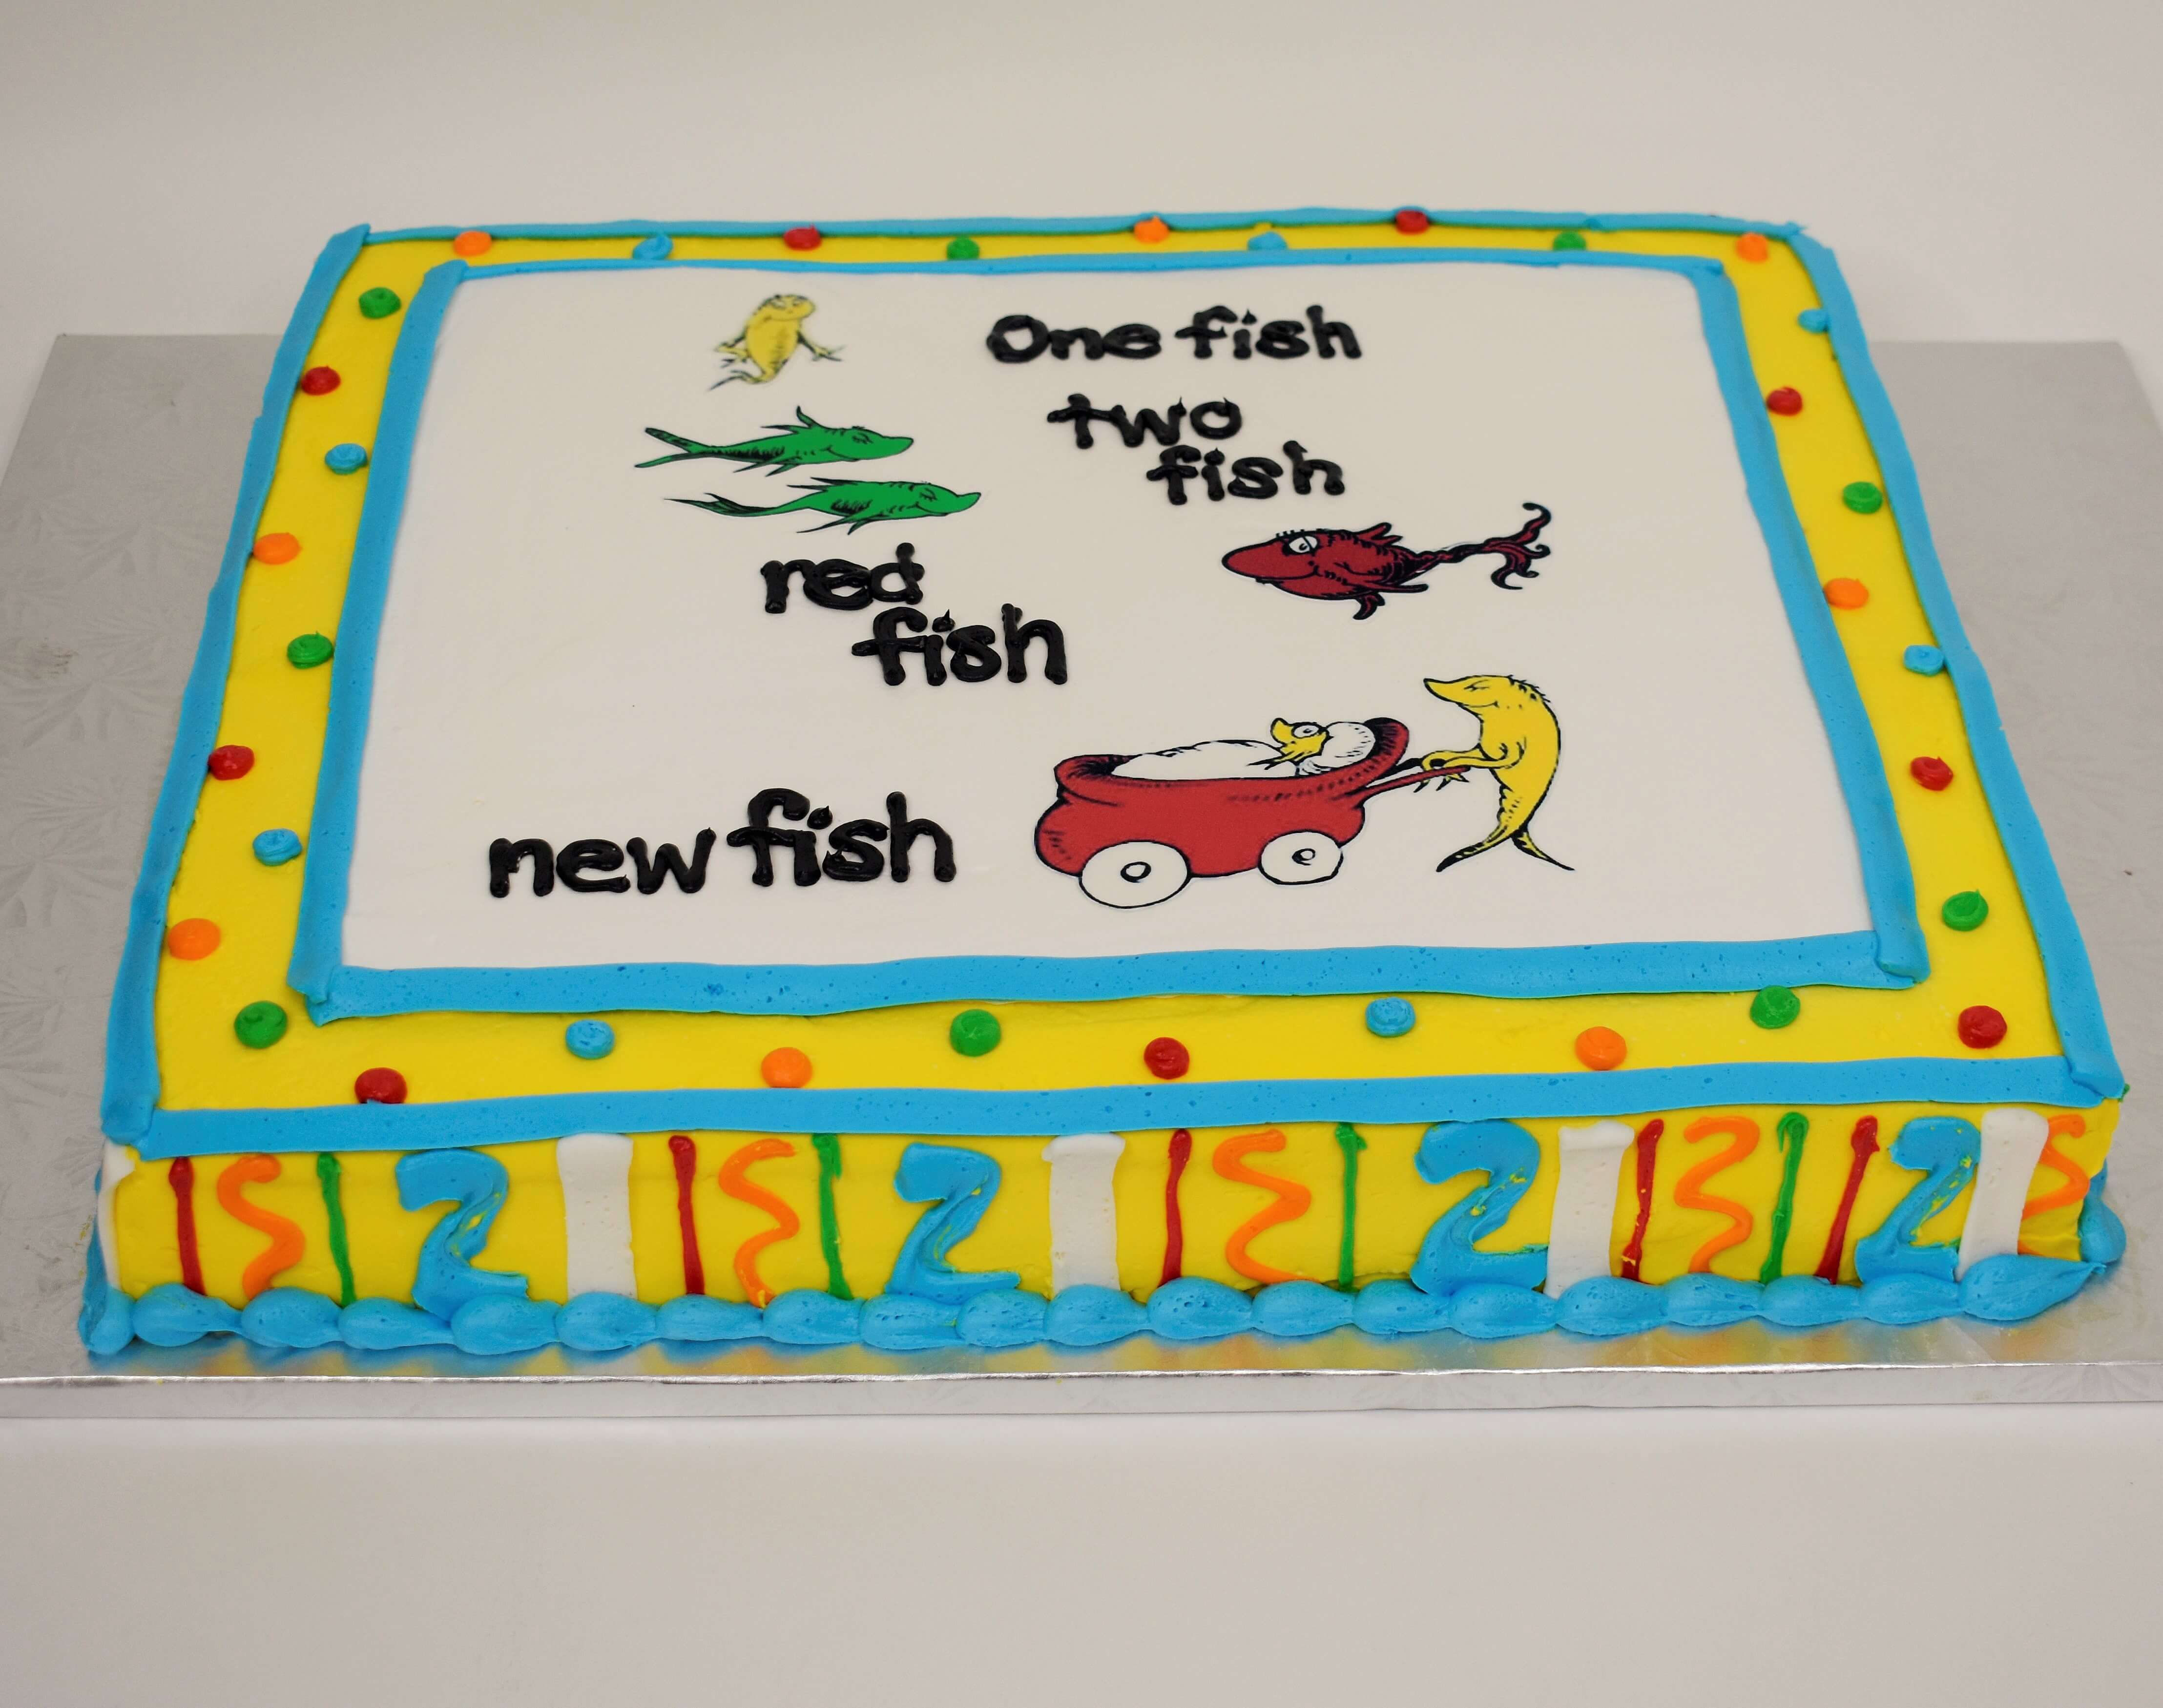 McArthur's Bakery Custom Cake with Dr. Seuss One Fish, Two Fish, Red Fish, New Fish